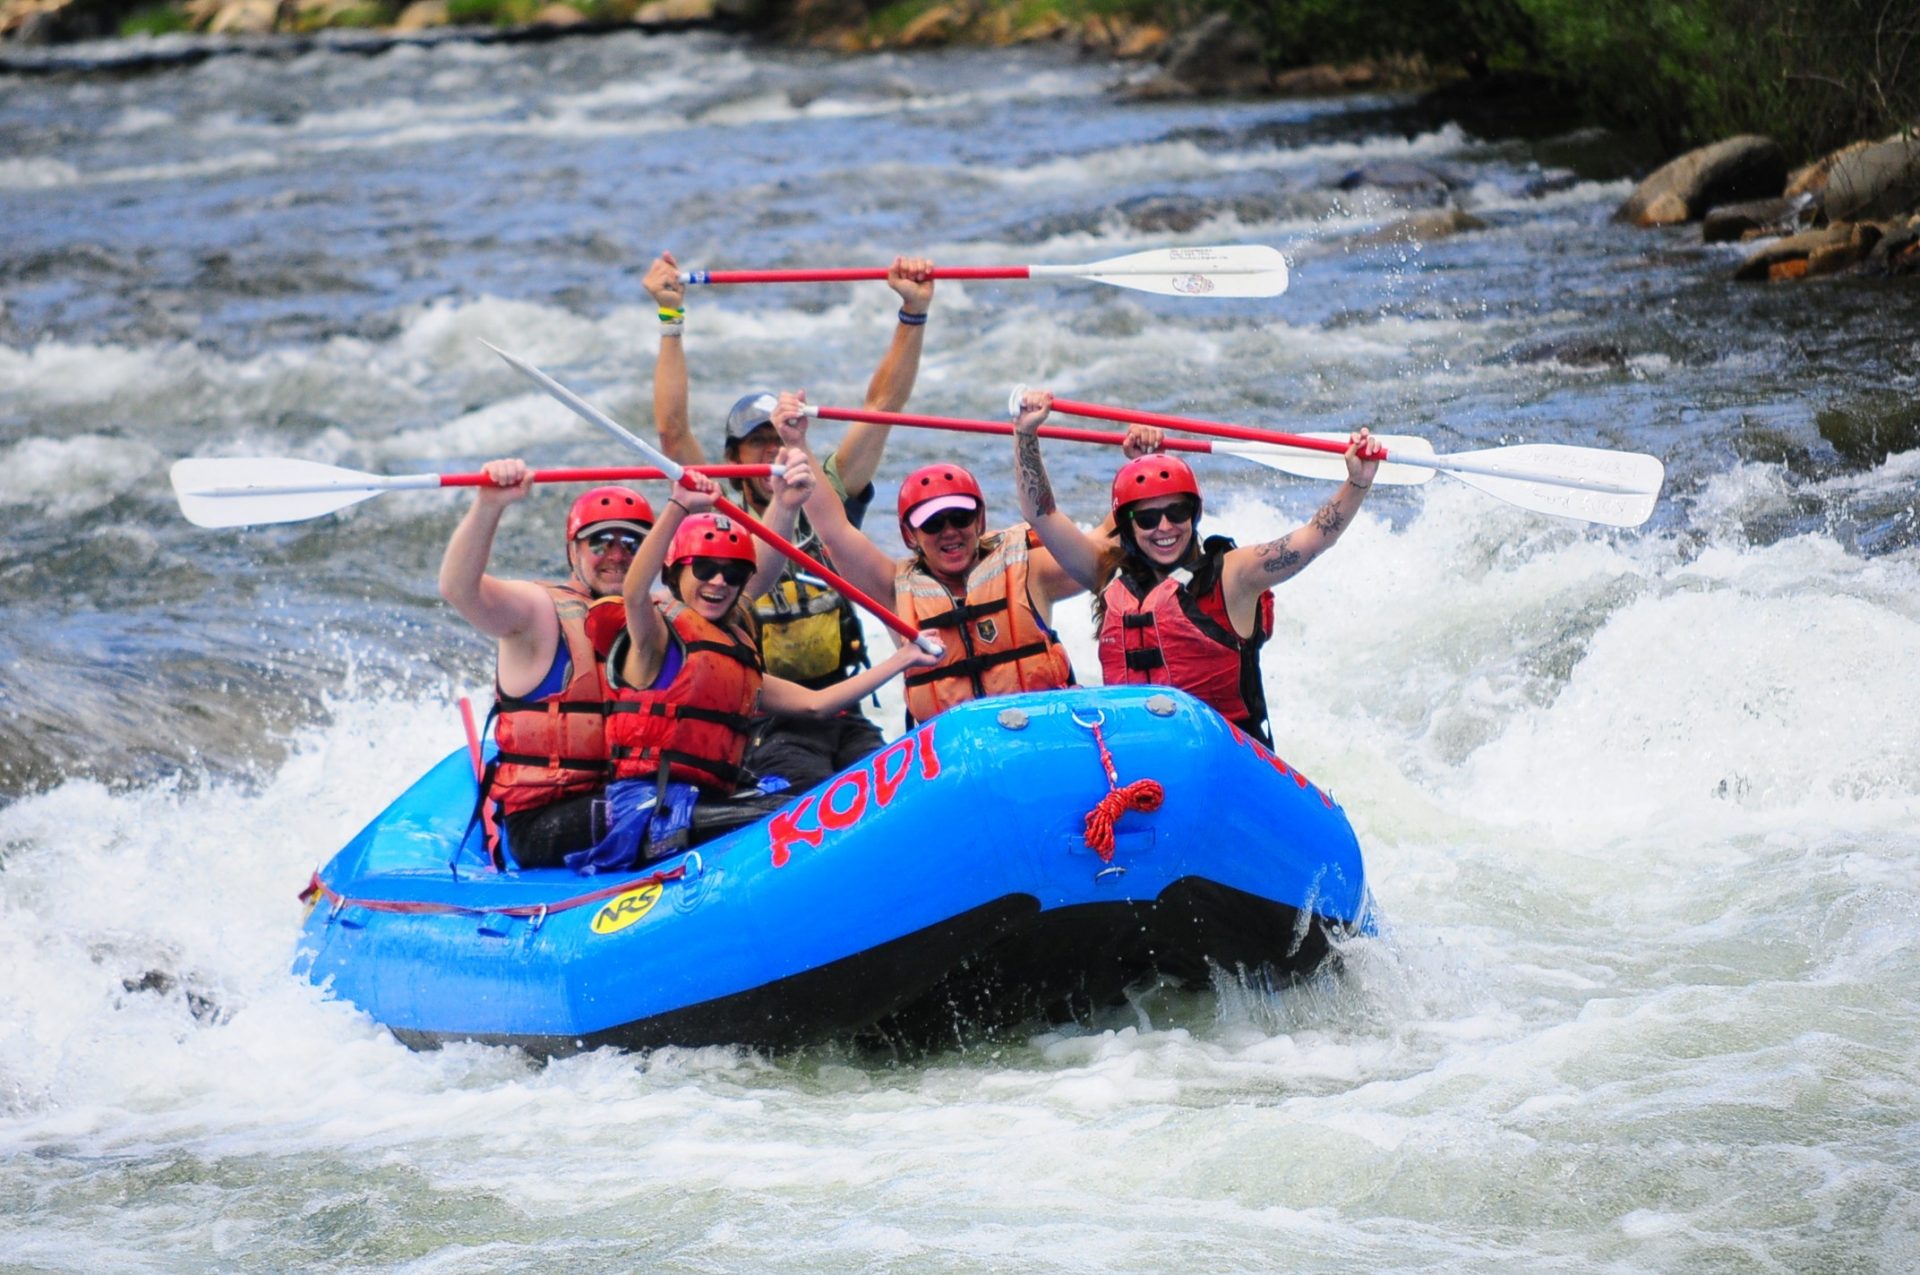 Fit and experienced tourists enjoy the challenges of Clear Creek rafting in Colorado